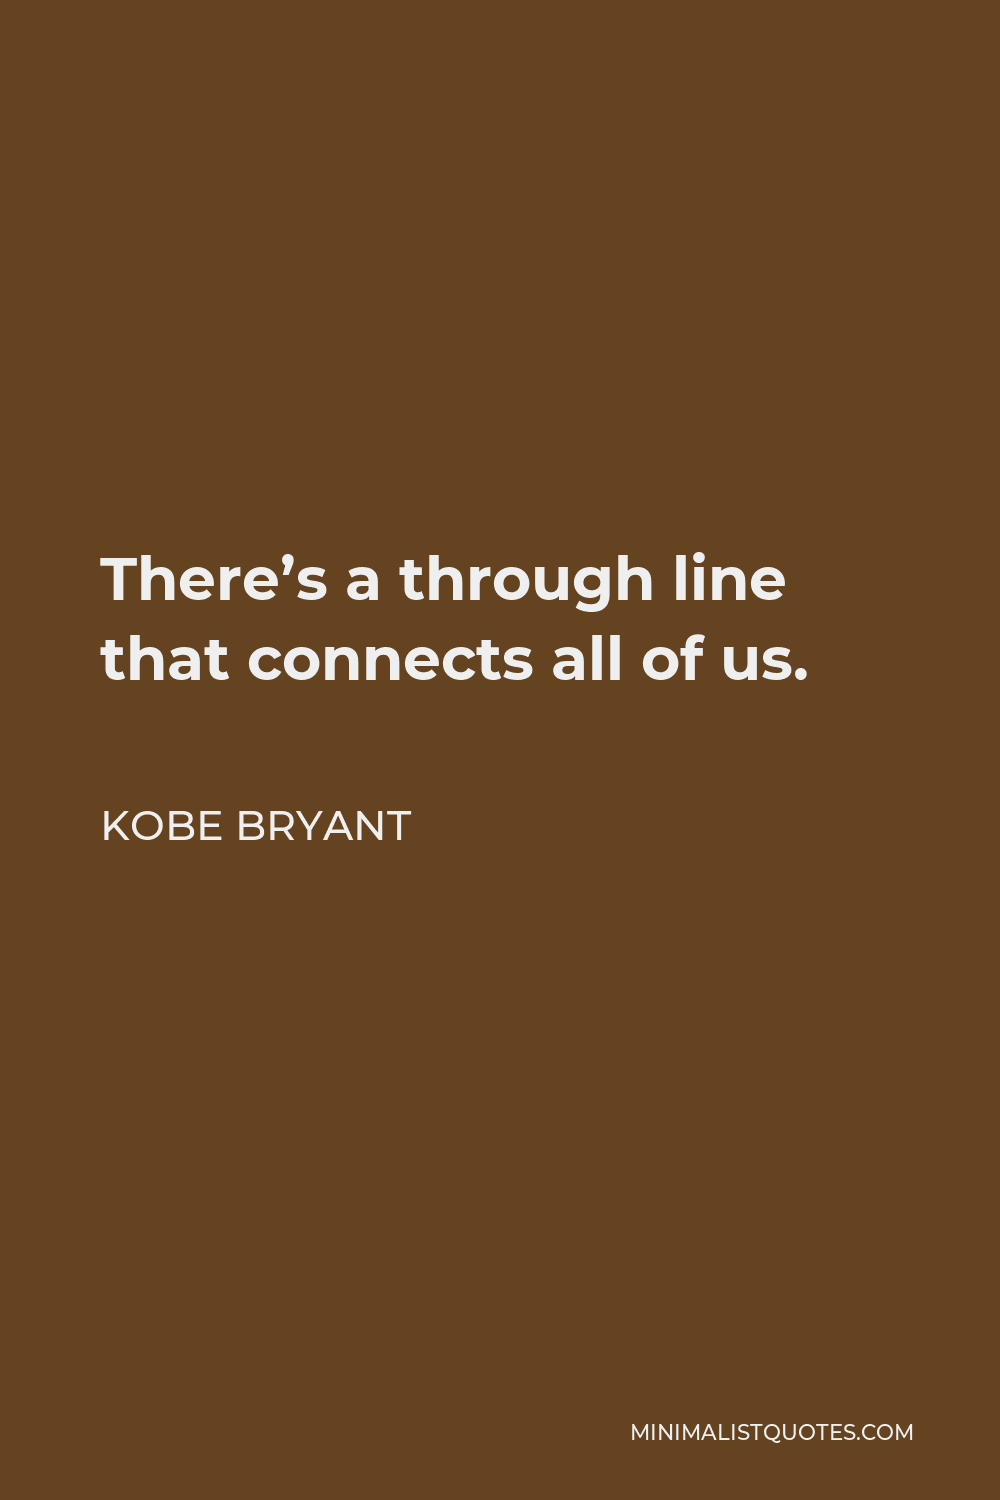 Kobe Bryant Quote - There’s a through line that connects all of us.